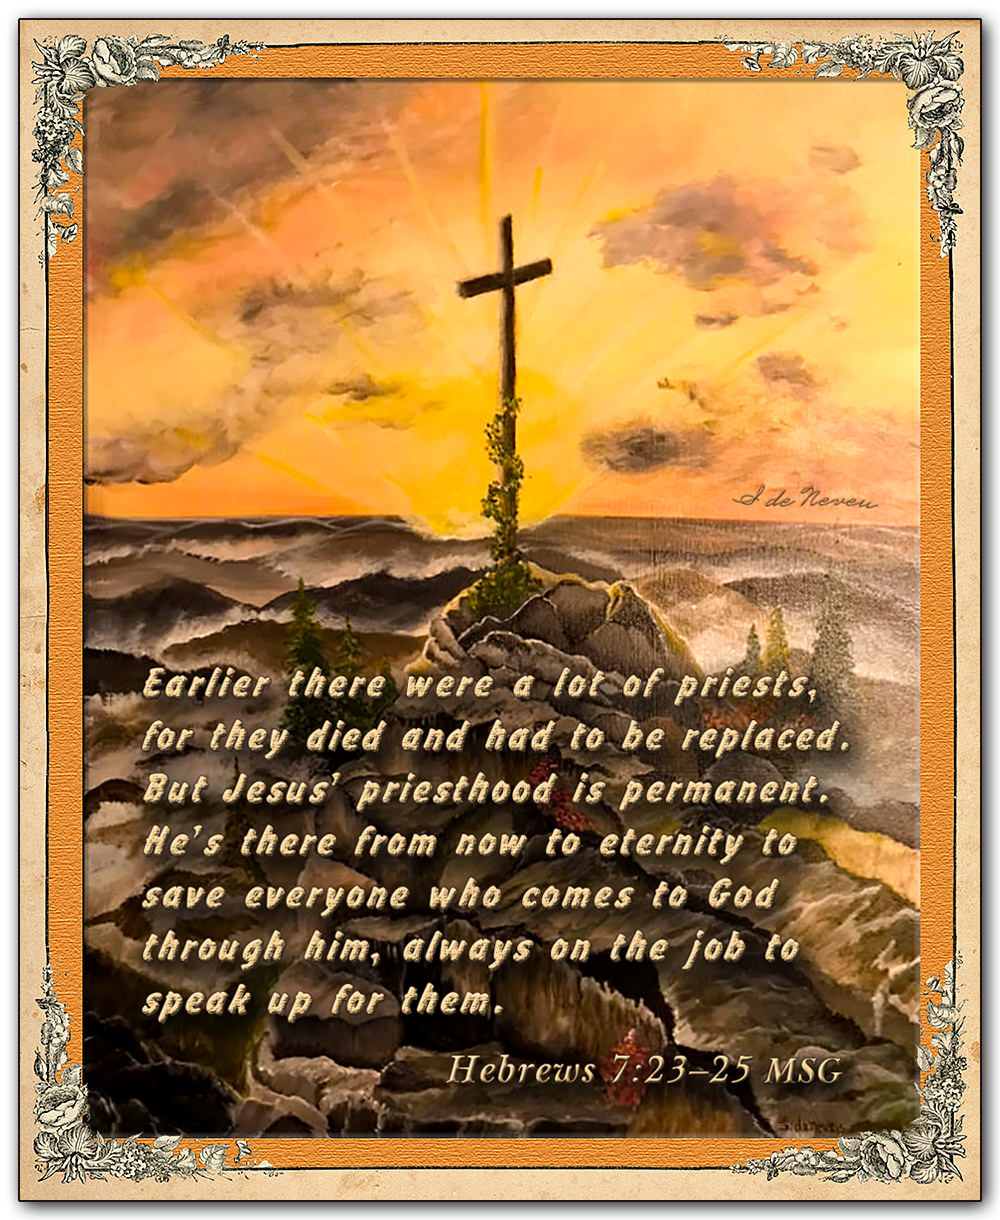 Scripture picture of Hebrews 7:23-25, emphasizing the fact that 'Jesus' priesthood is permanent.'